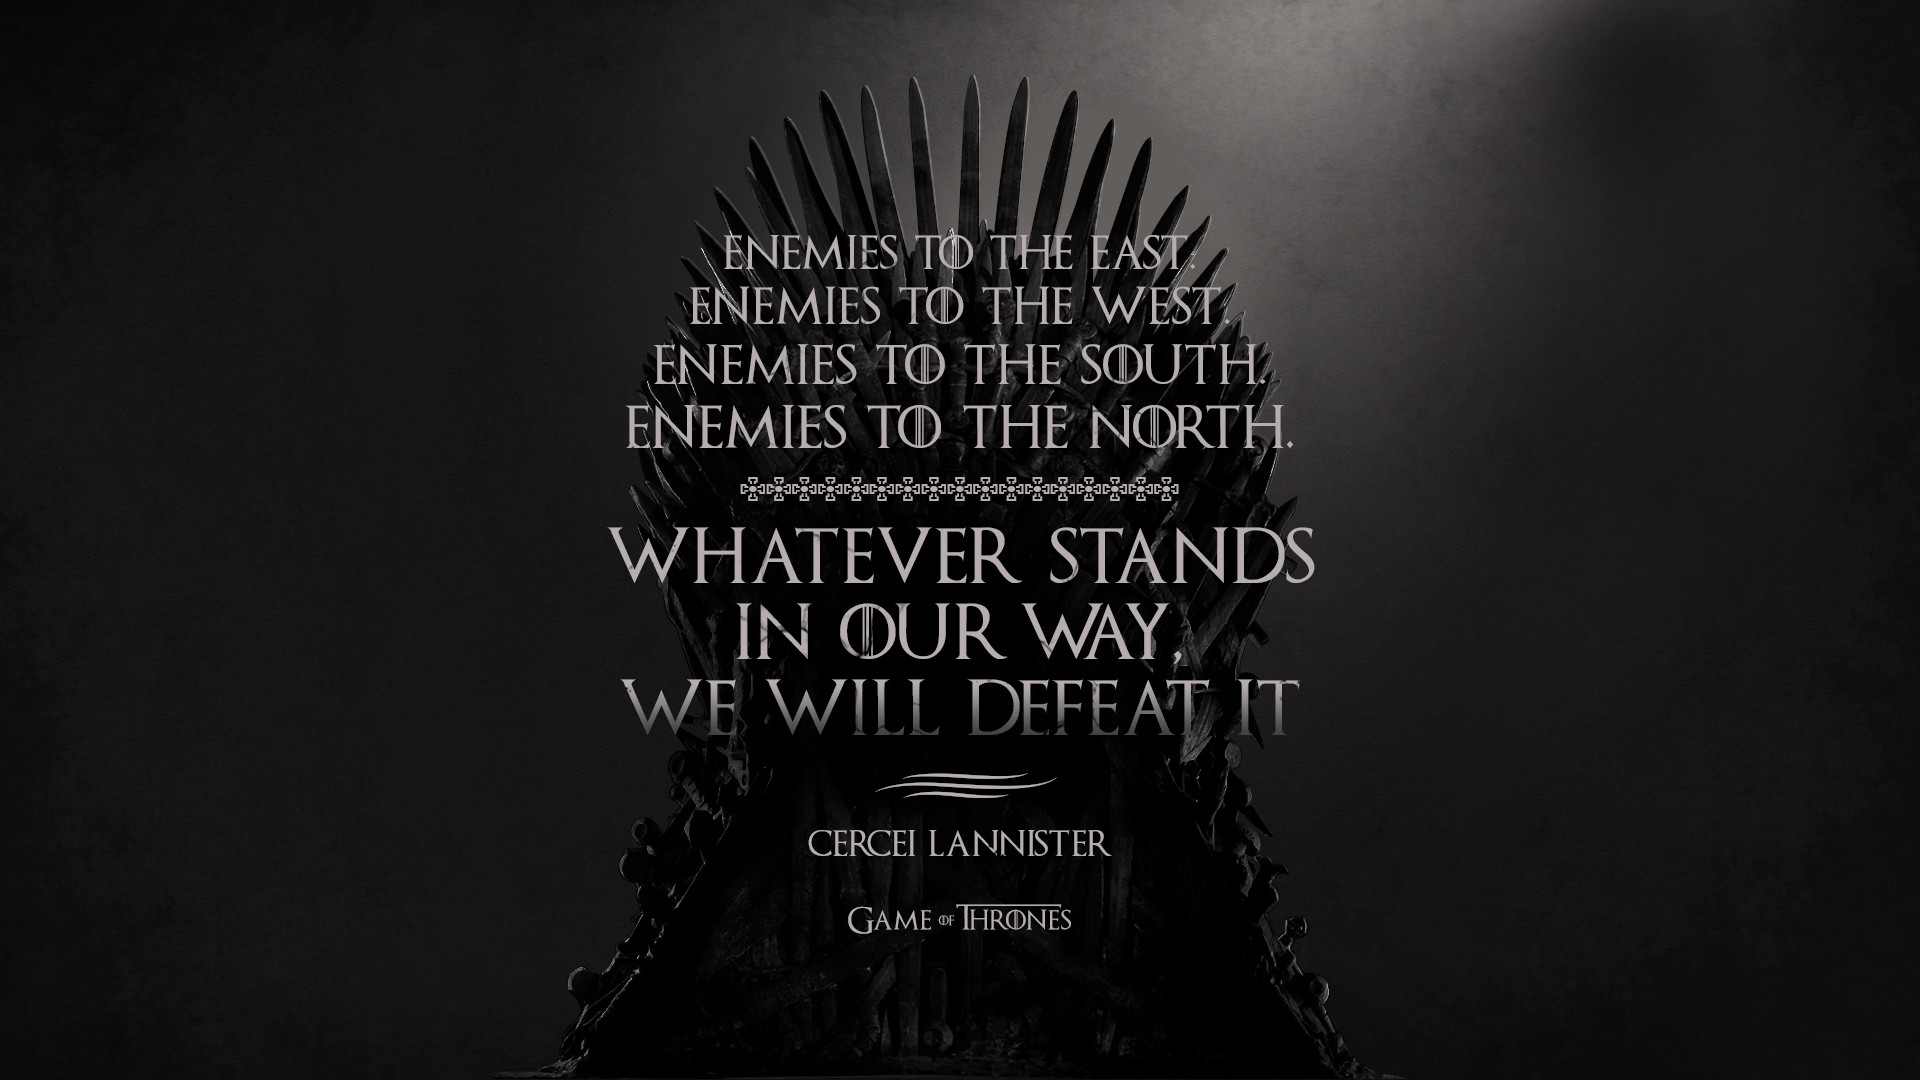 Game of Thrones, Book quotes Wallpaper